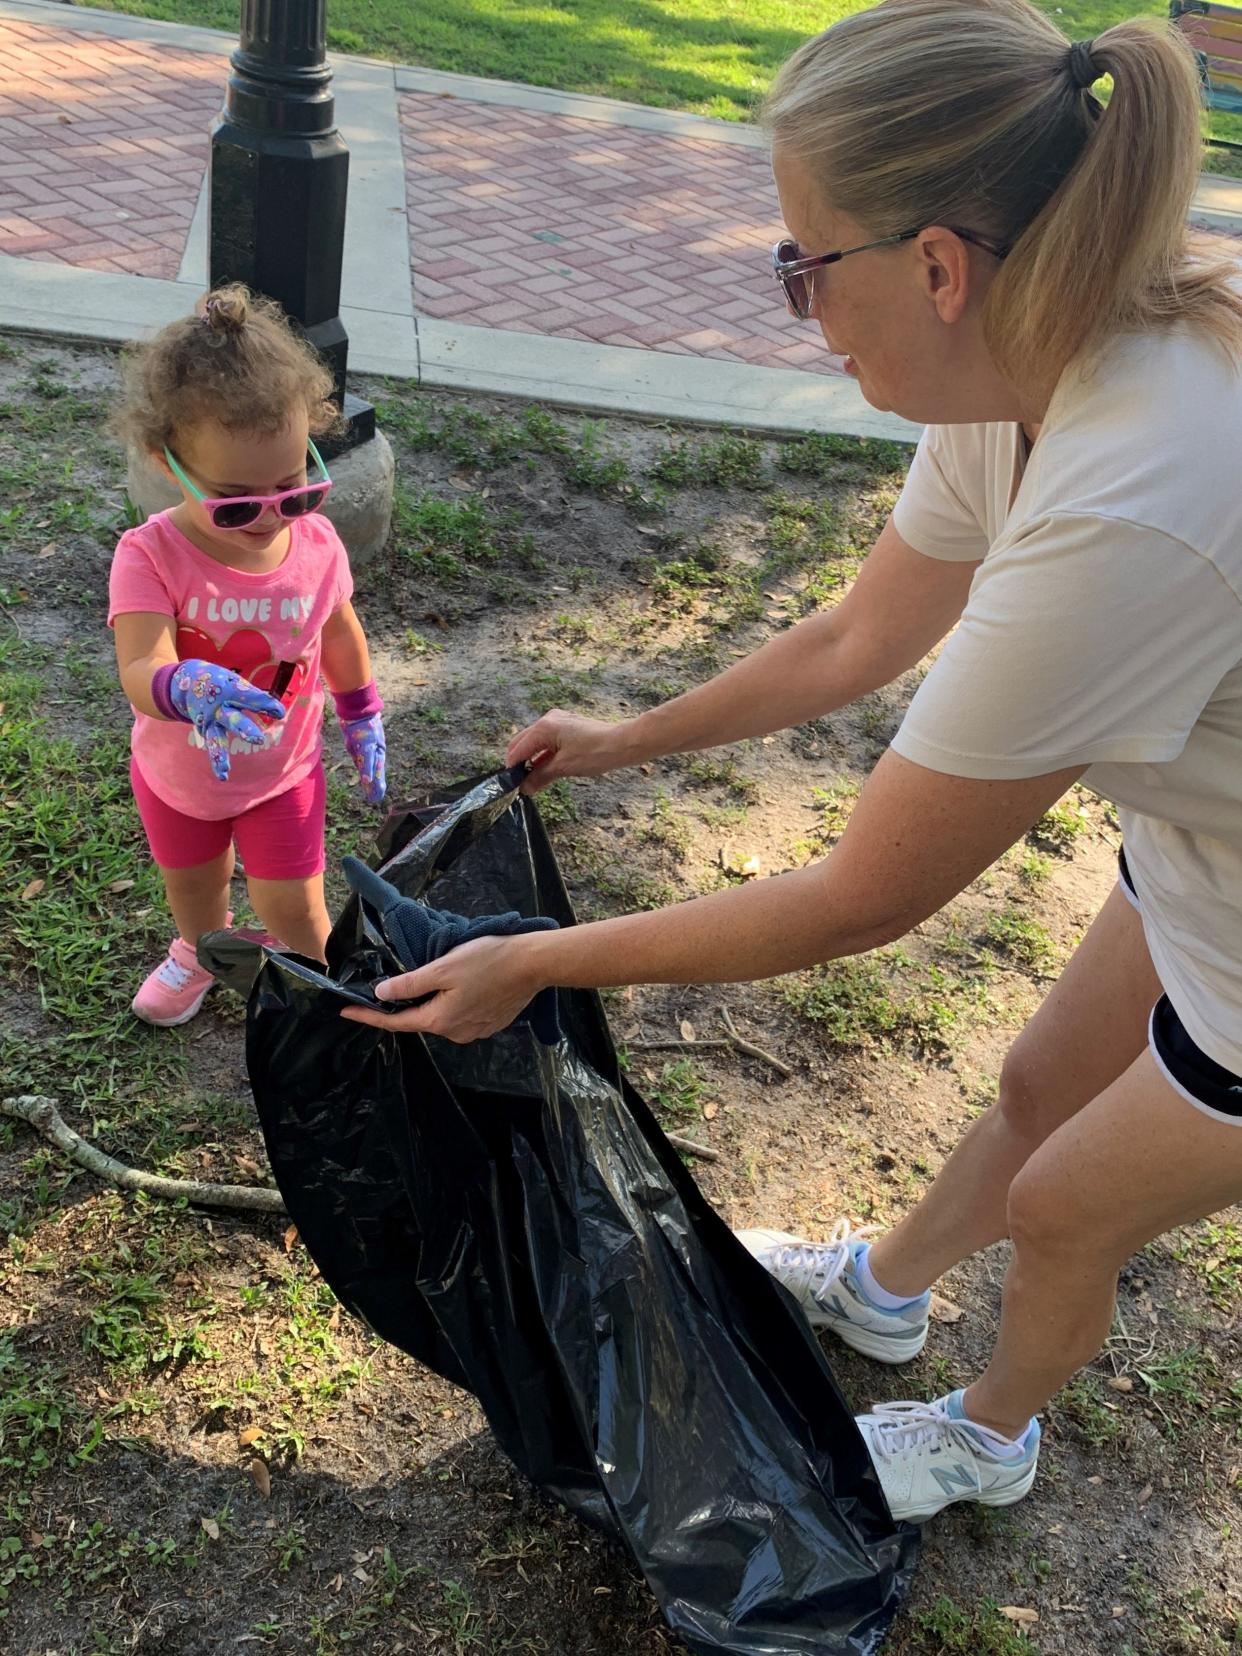 Lilly Arjoon, 2, drops a bottle cap into a trash bag as she helps her grandmother, Chris Myers, pick up trash in Cocoa Village.